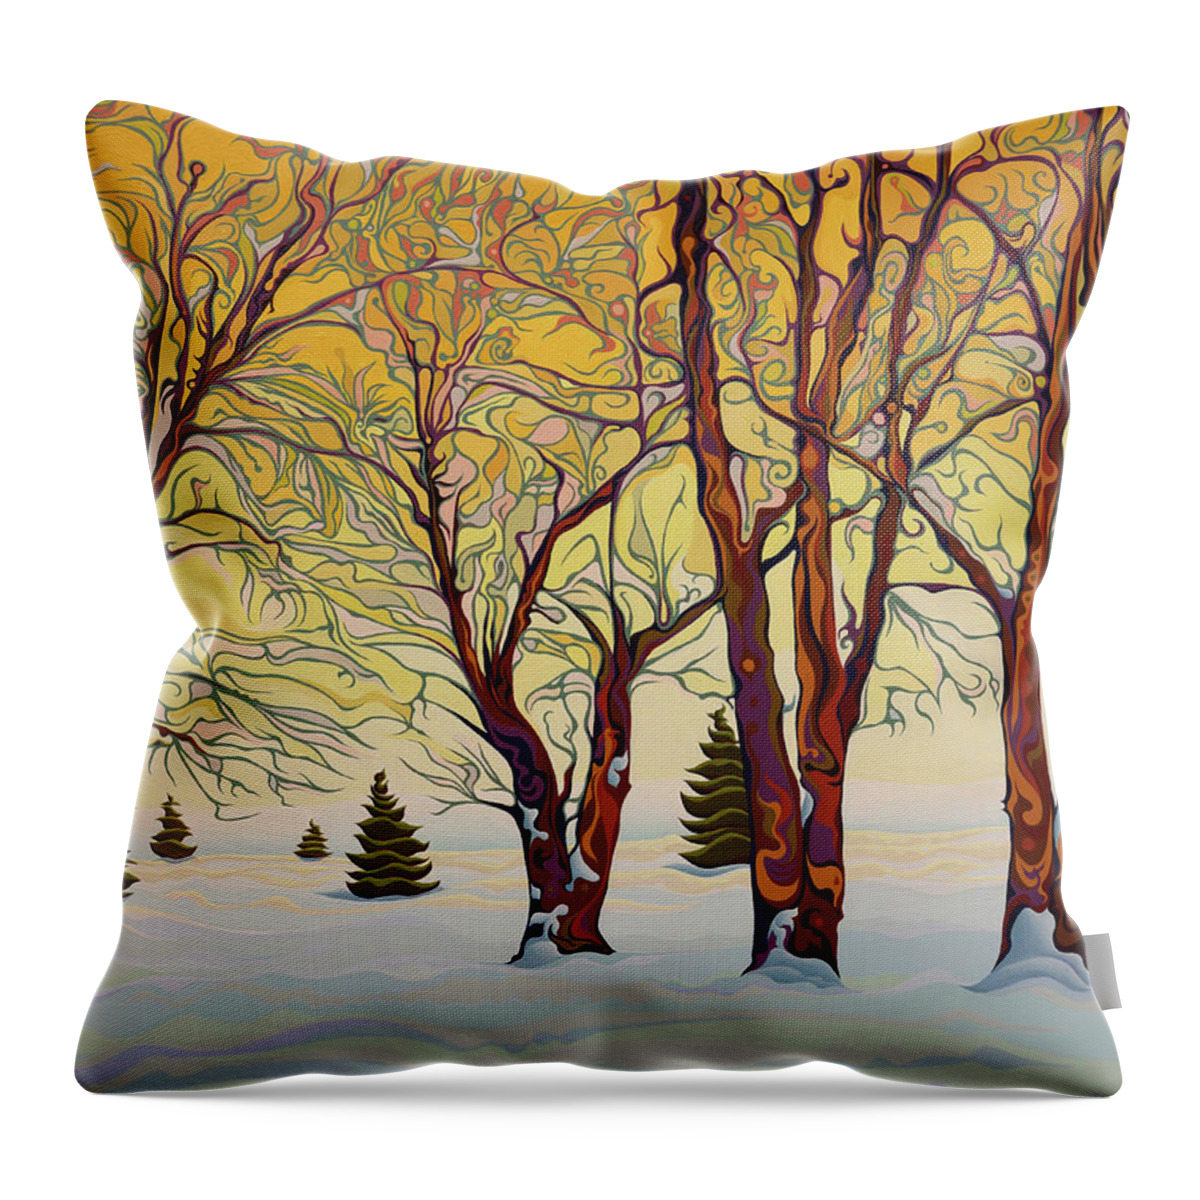 Euphoric Throw Pillow featuring the painting Euphoric TreeQuility by Amy Ferrari